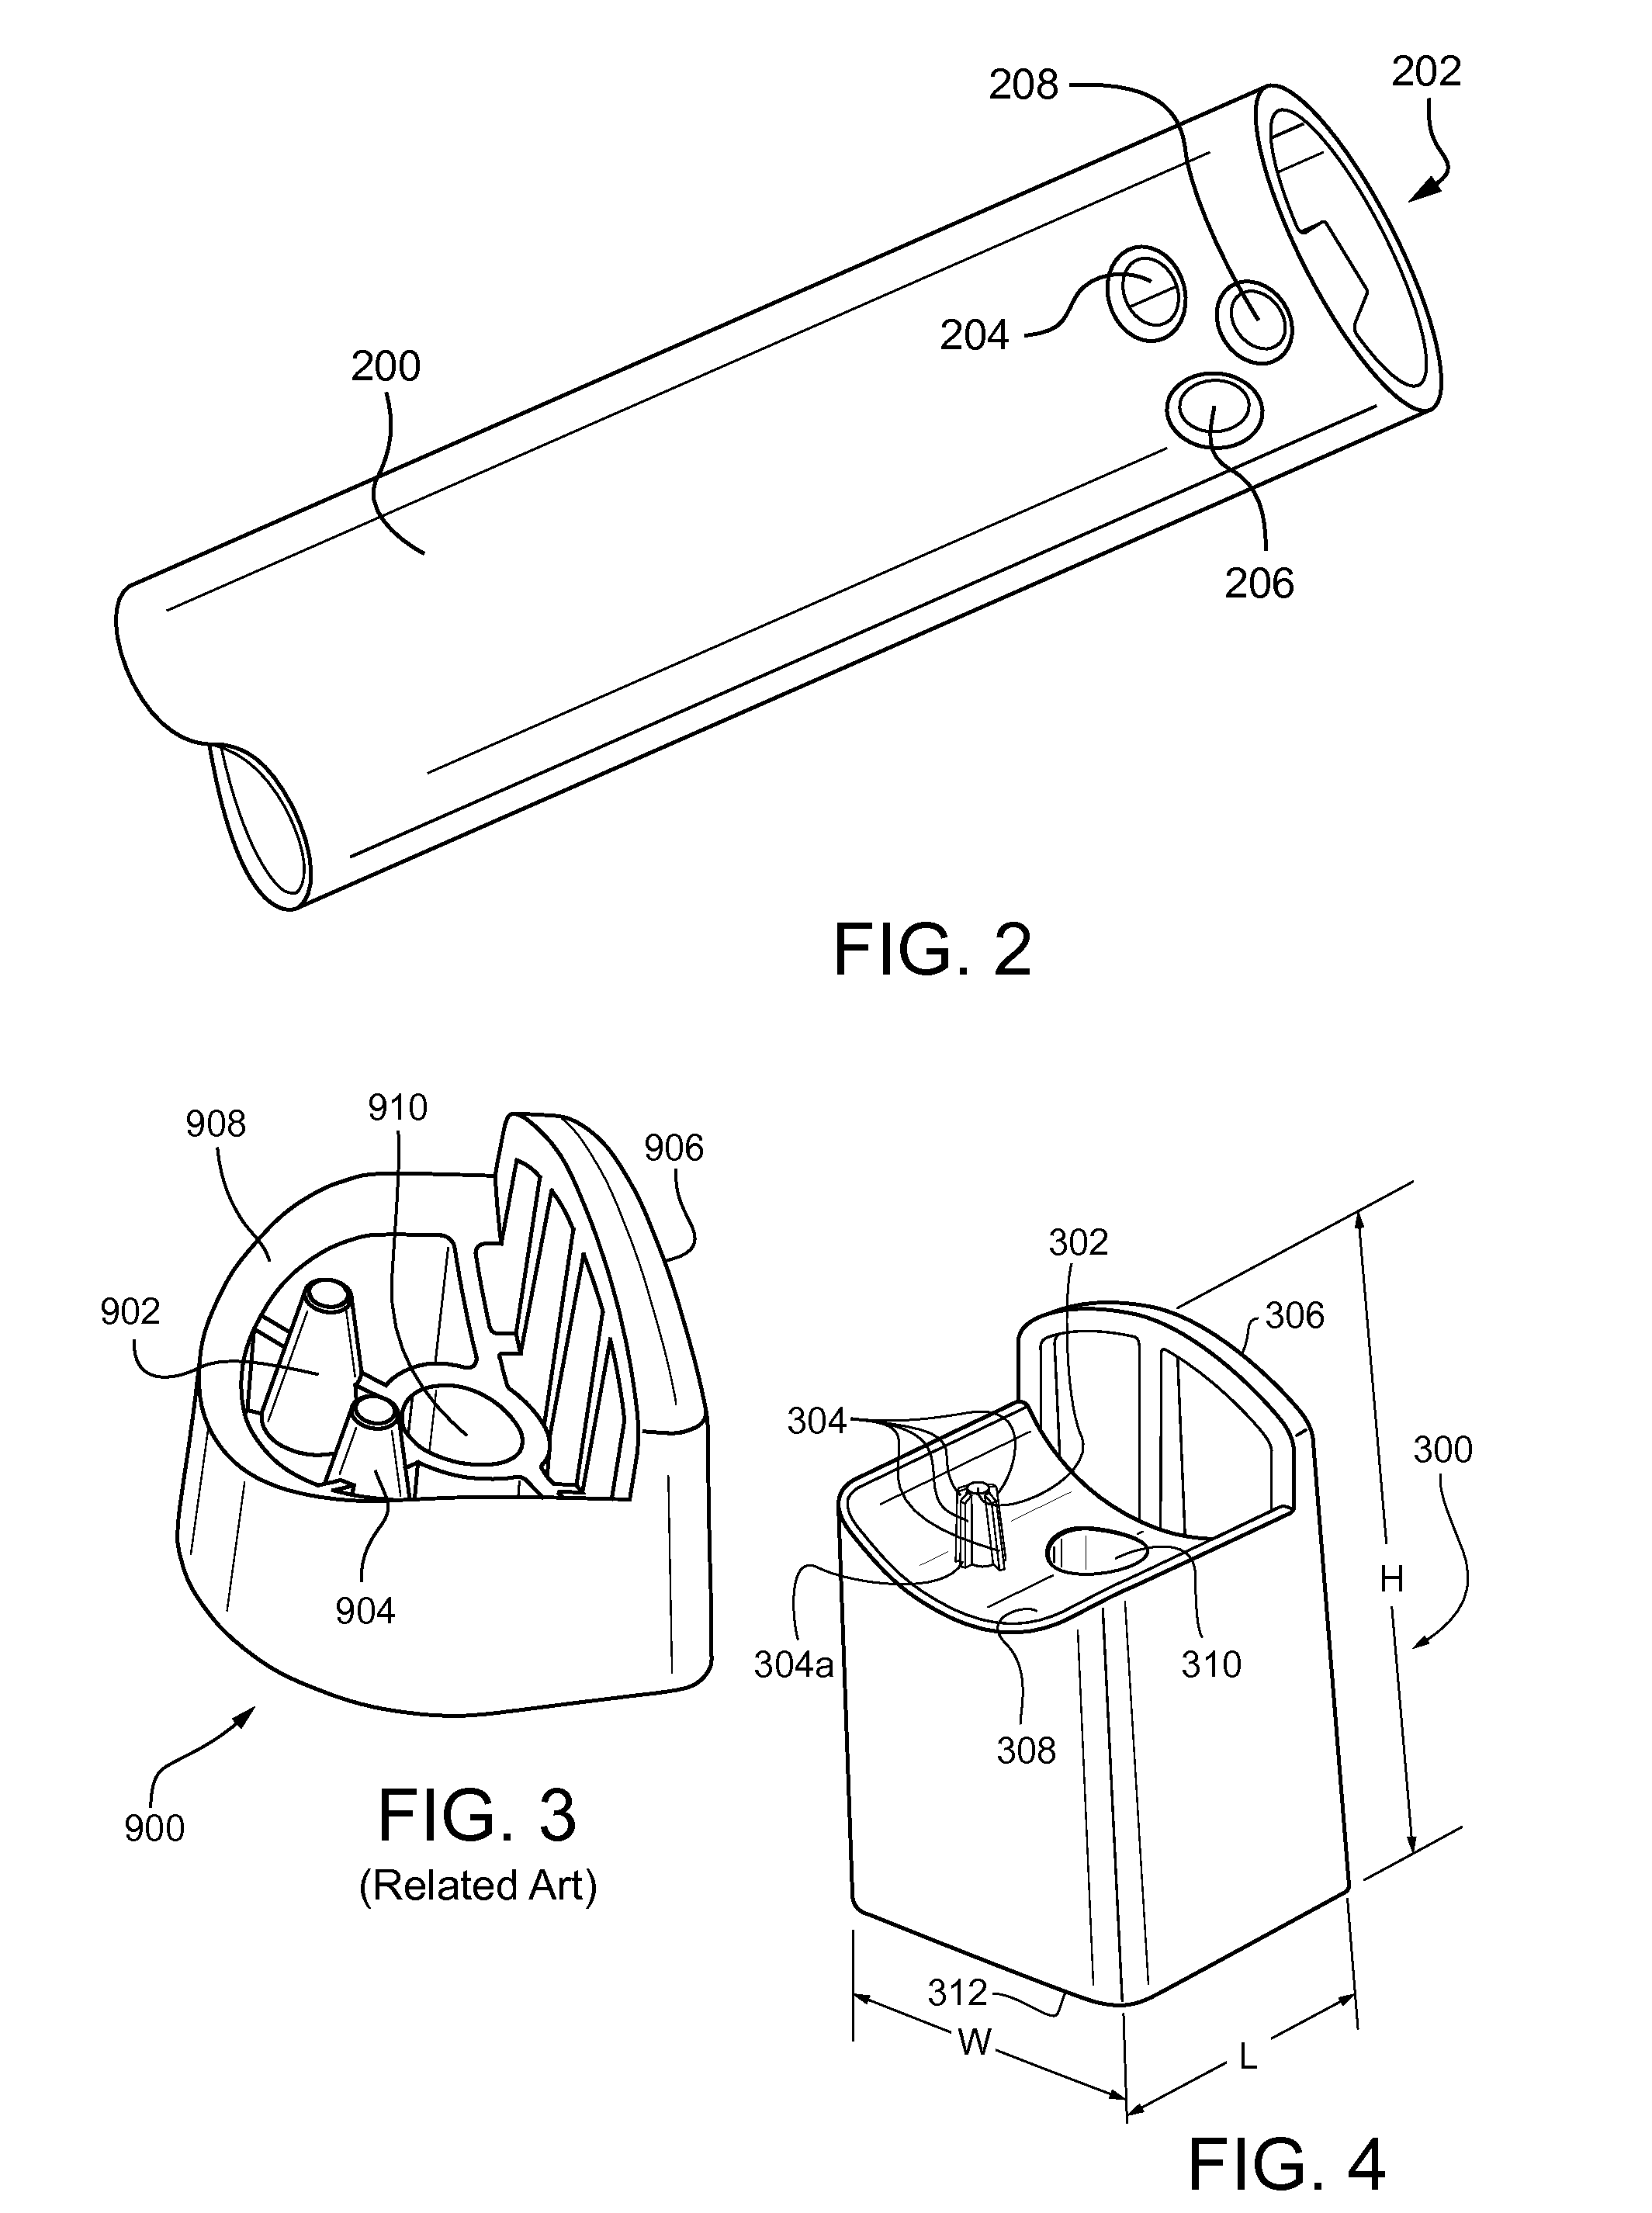 Home appliance with handle, end cap, and crush rib